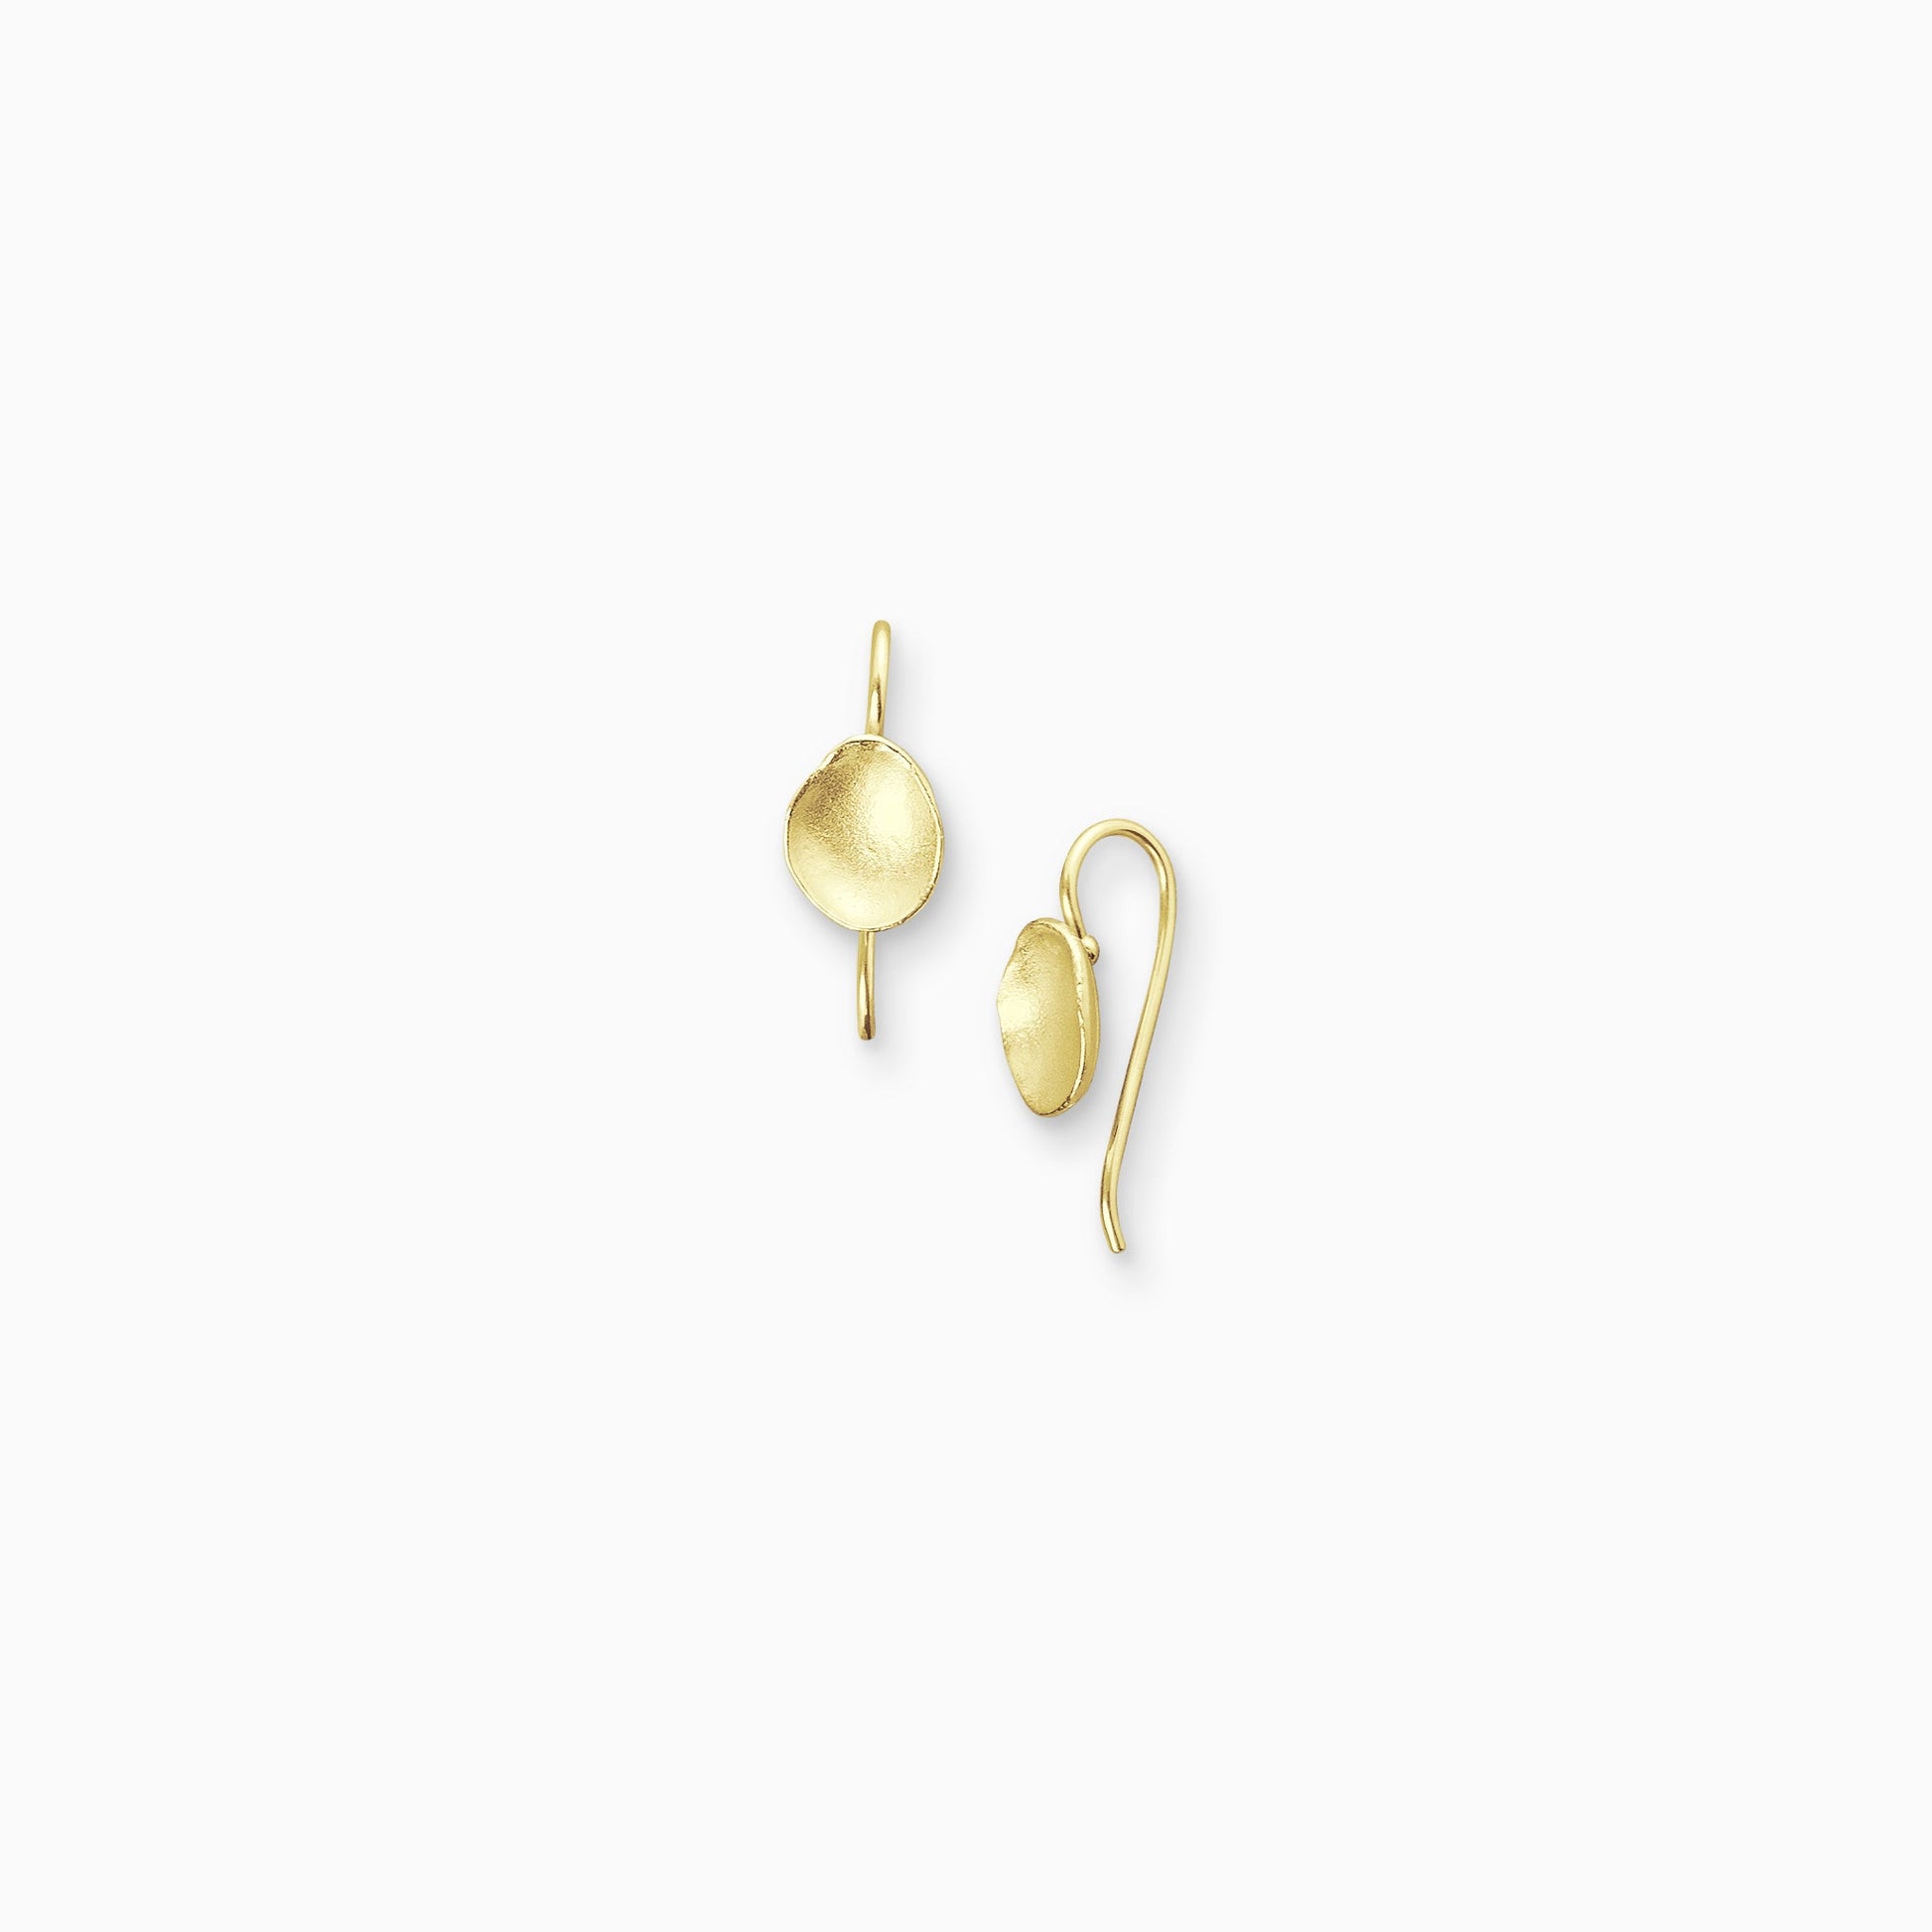 A pair of 18ct Fairtrade yellow gold small concave oval shaped earrings with a hook fastening. Satin finish. 20mm length, 8mm width